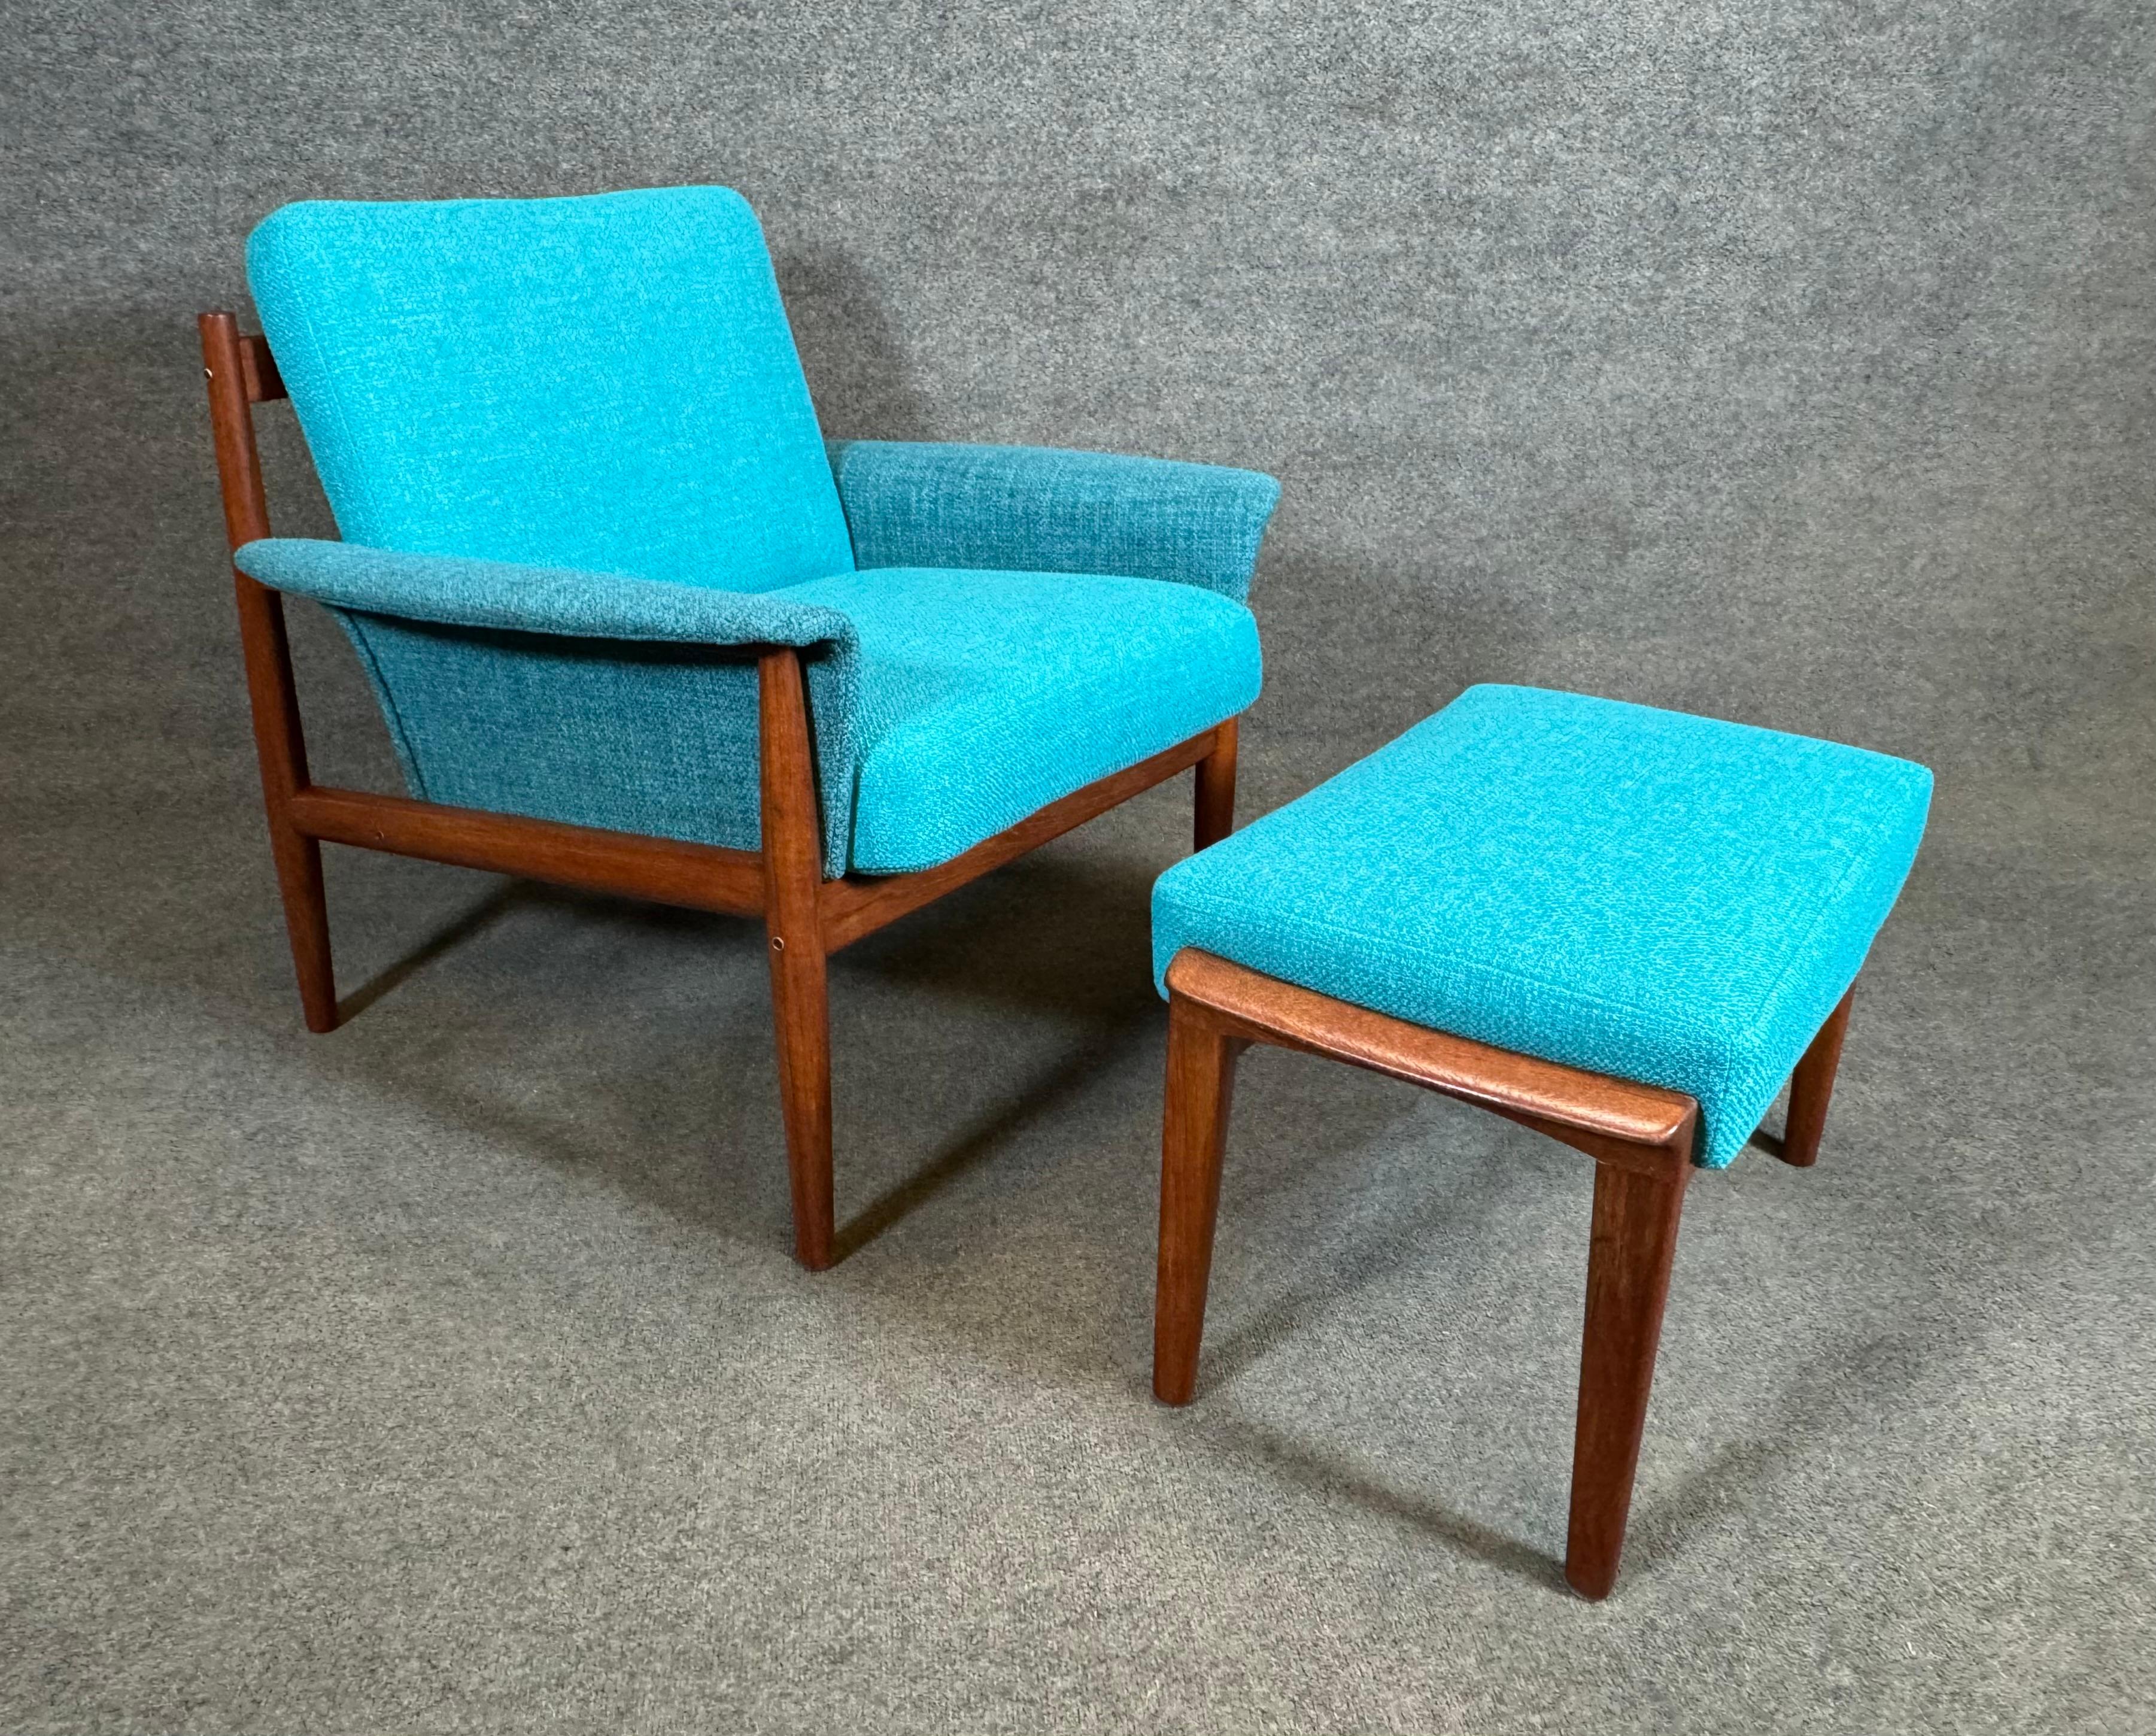 Vintage Danish Mid Century Modern Teak Lounge Chair and Ottoman by Grete Jalk For Sale 4